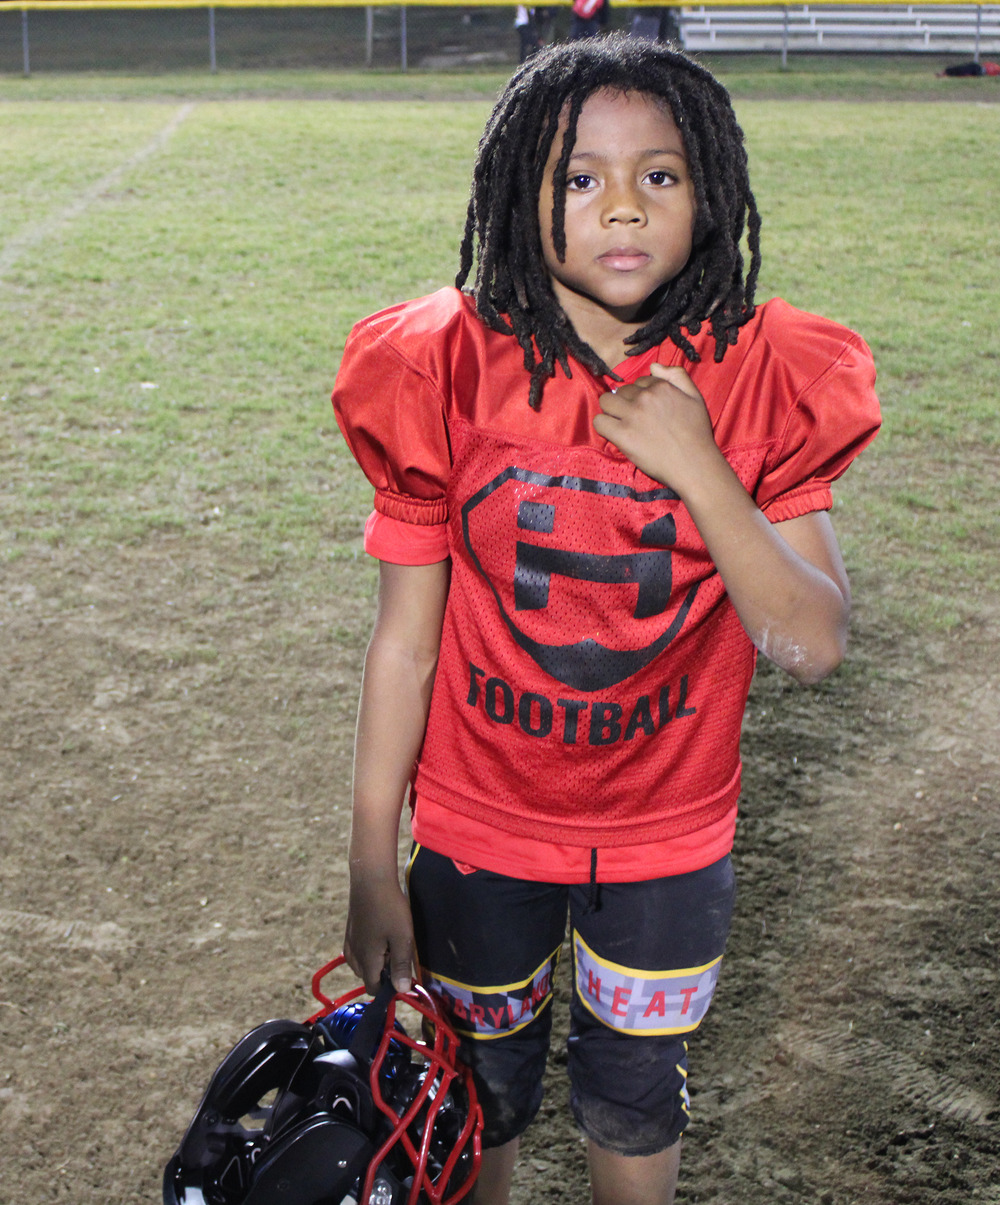 Maryland Heat running back Santana Campfield, 9, takes a breather after practice in Fort Washington, Maryland, on Nov. 9, 2023. Photo by Torrence Banks/University of Maryland